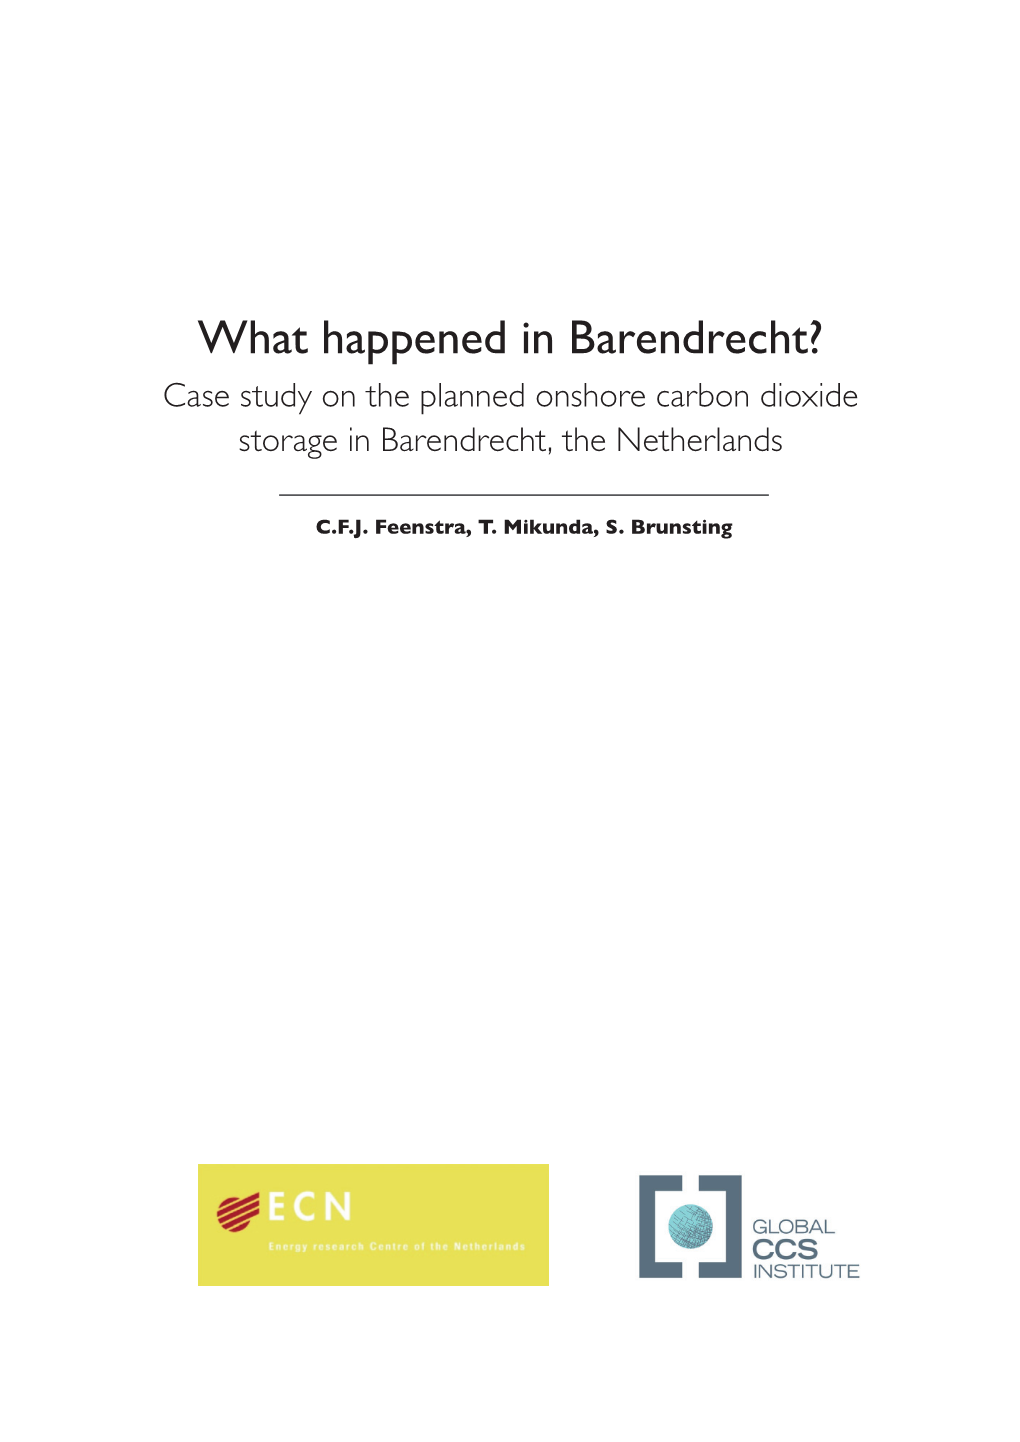 What Happened in Barendrecht? Case Study on the Planned Onshore Carbon Dioxide Storage in Barendrecht, the Netherlands